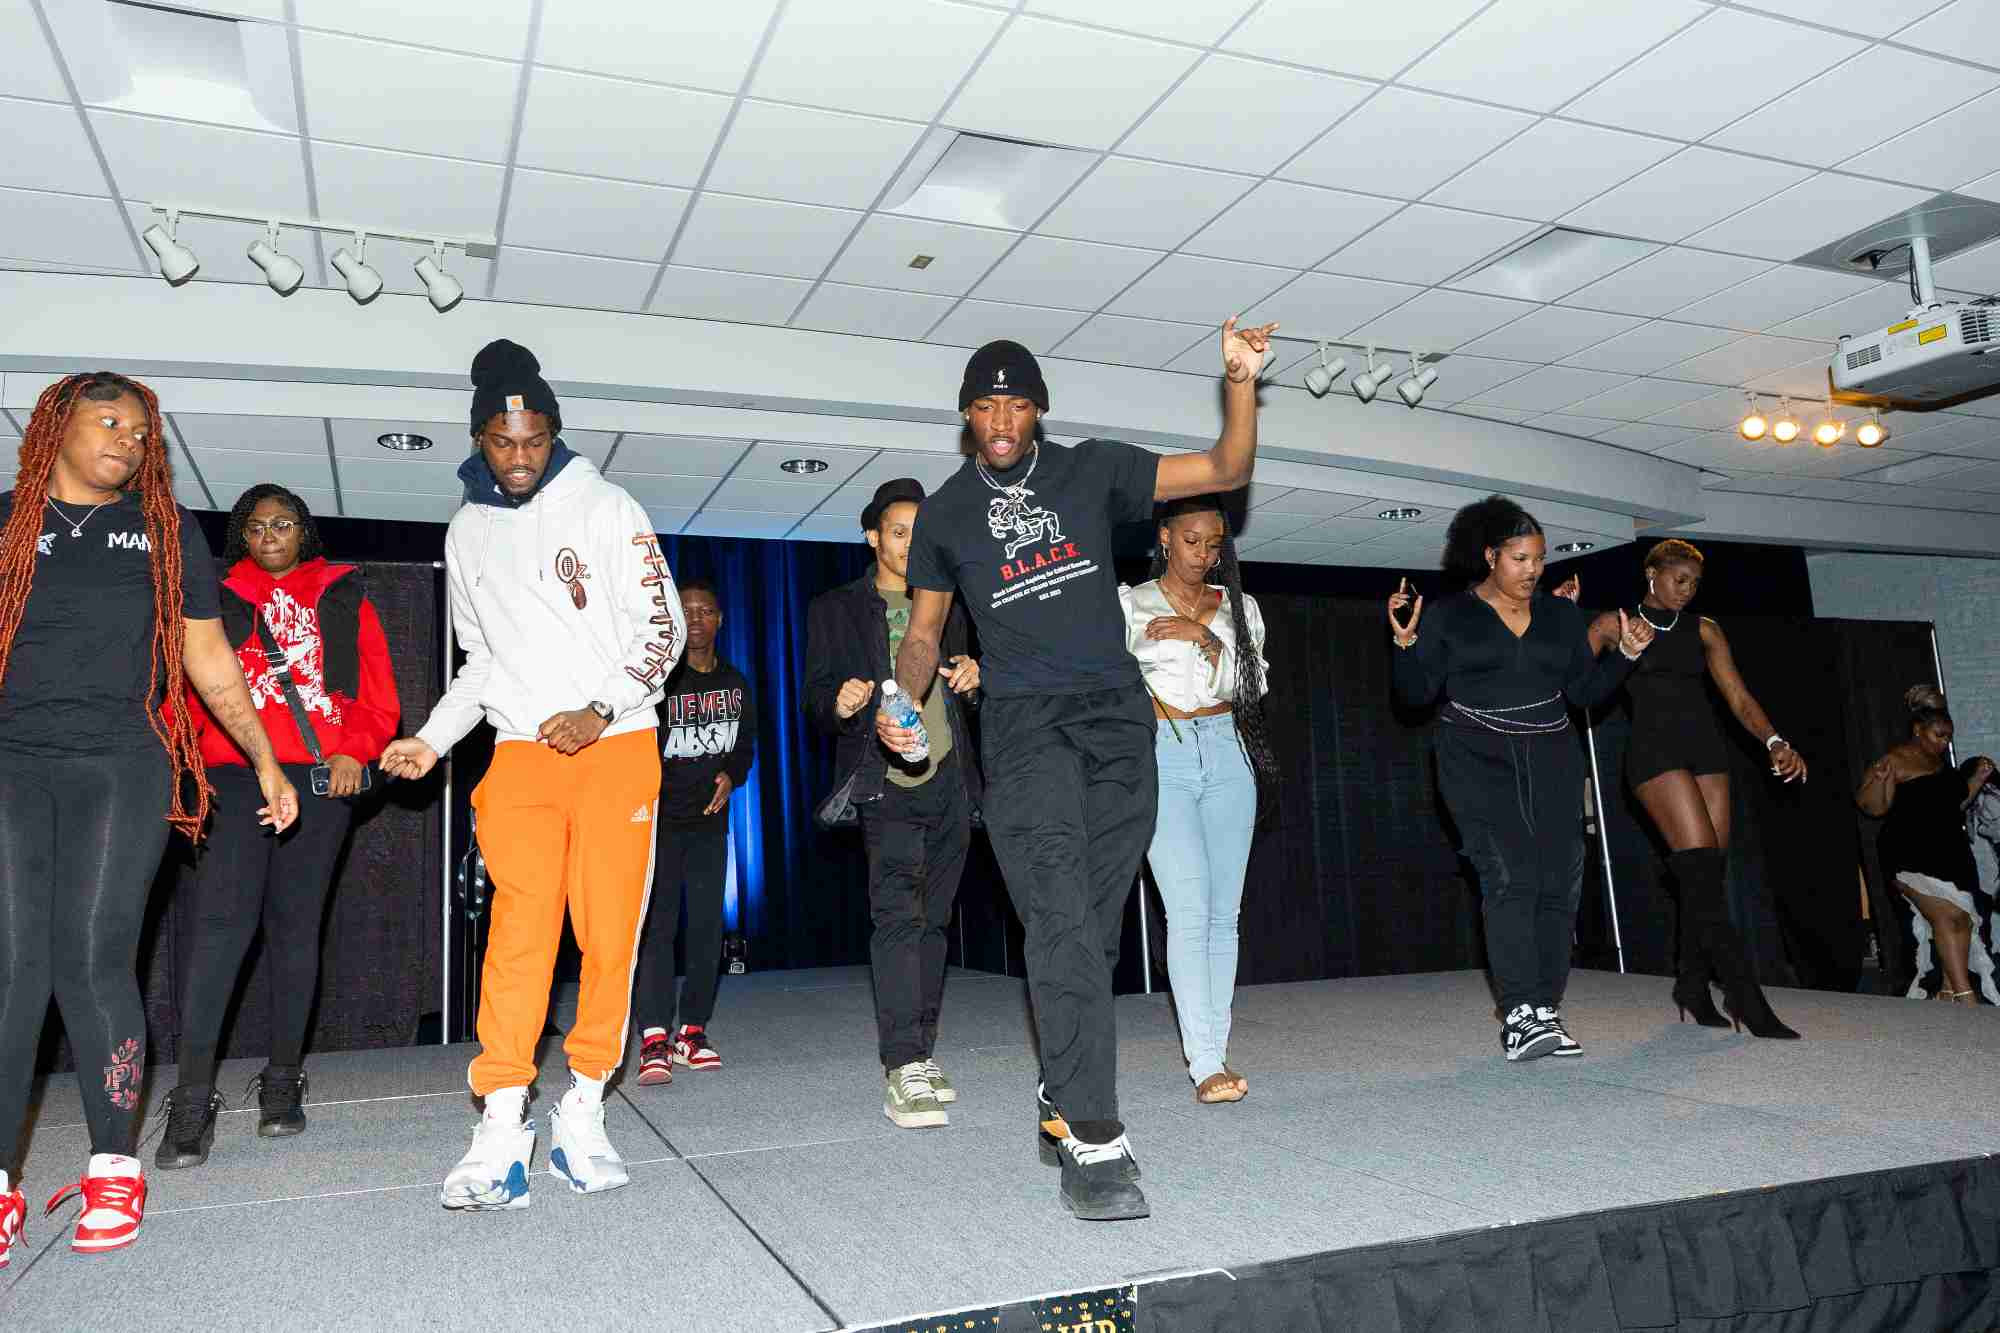 A group of Model Entertainment students dancing onstage